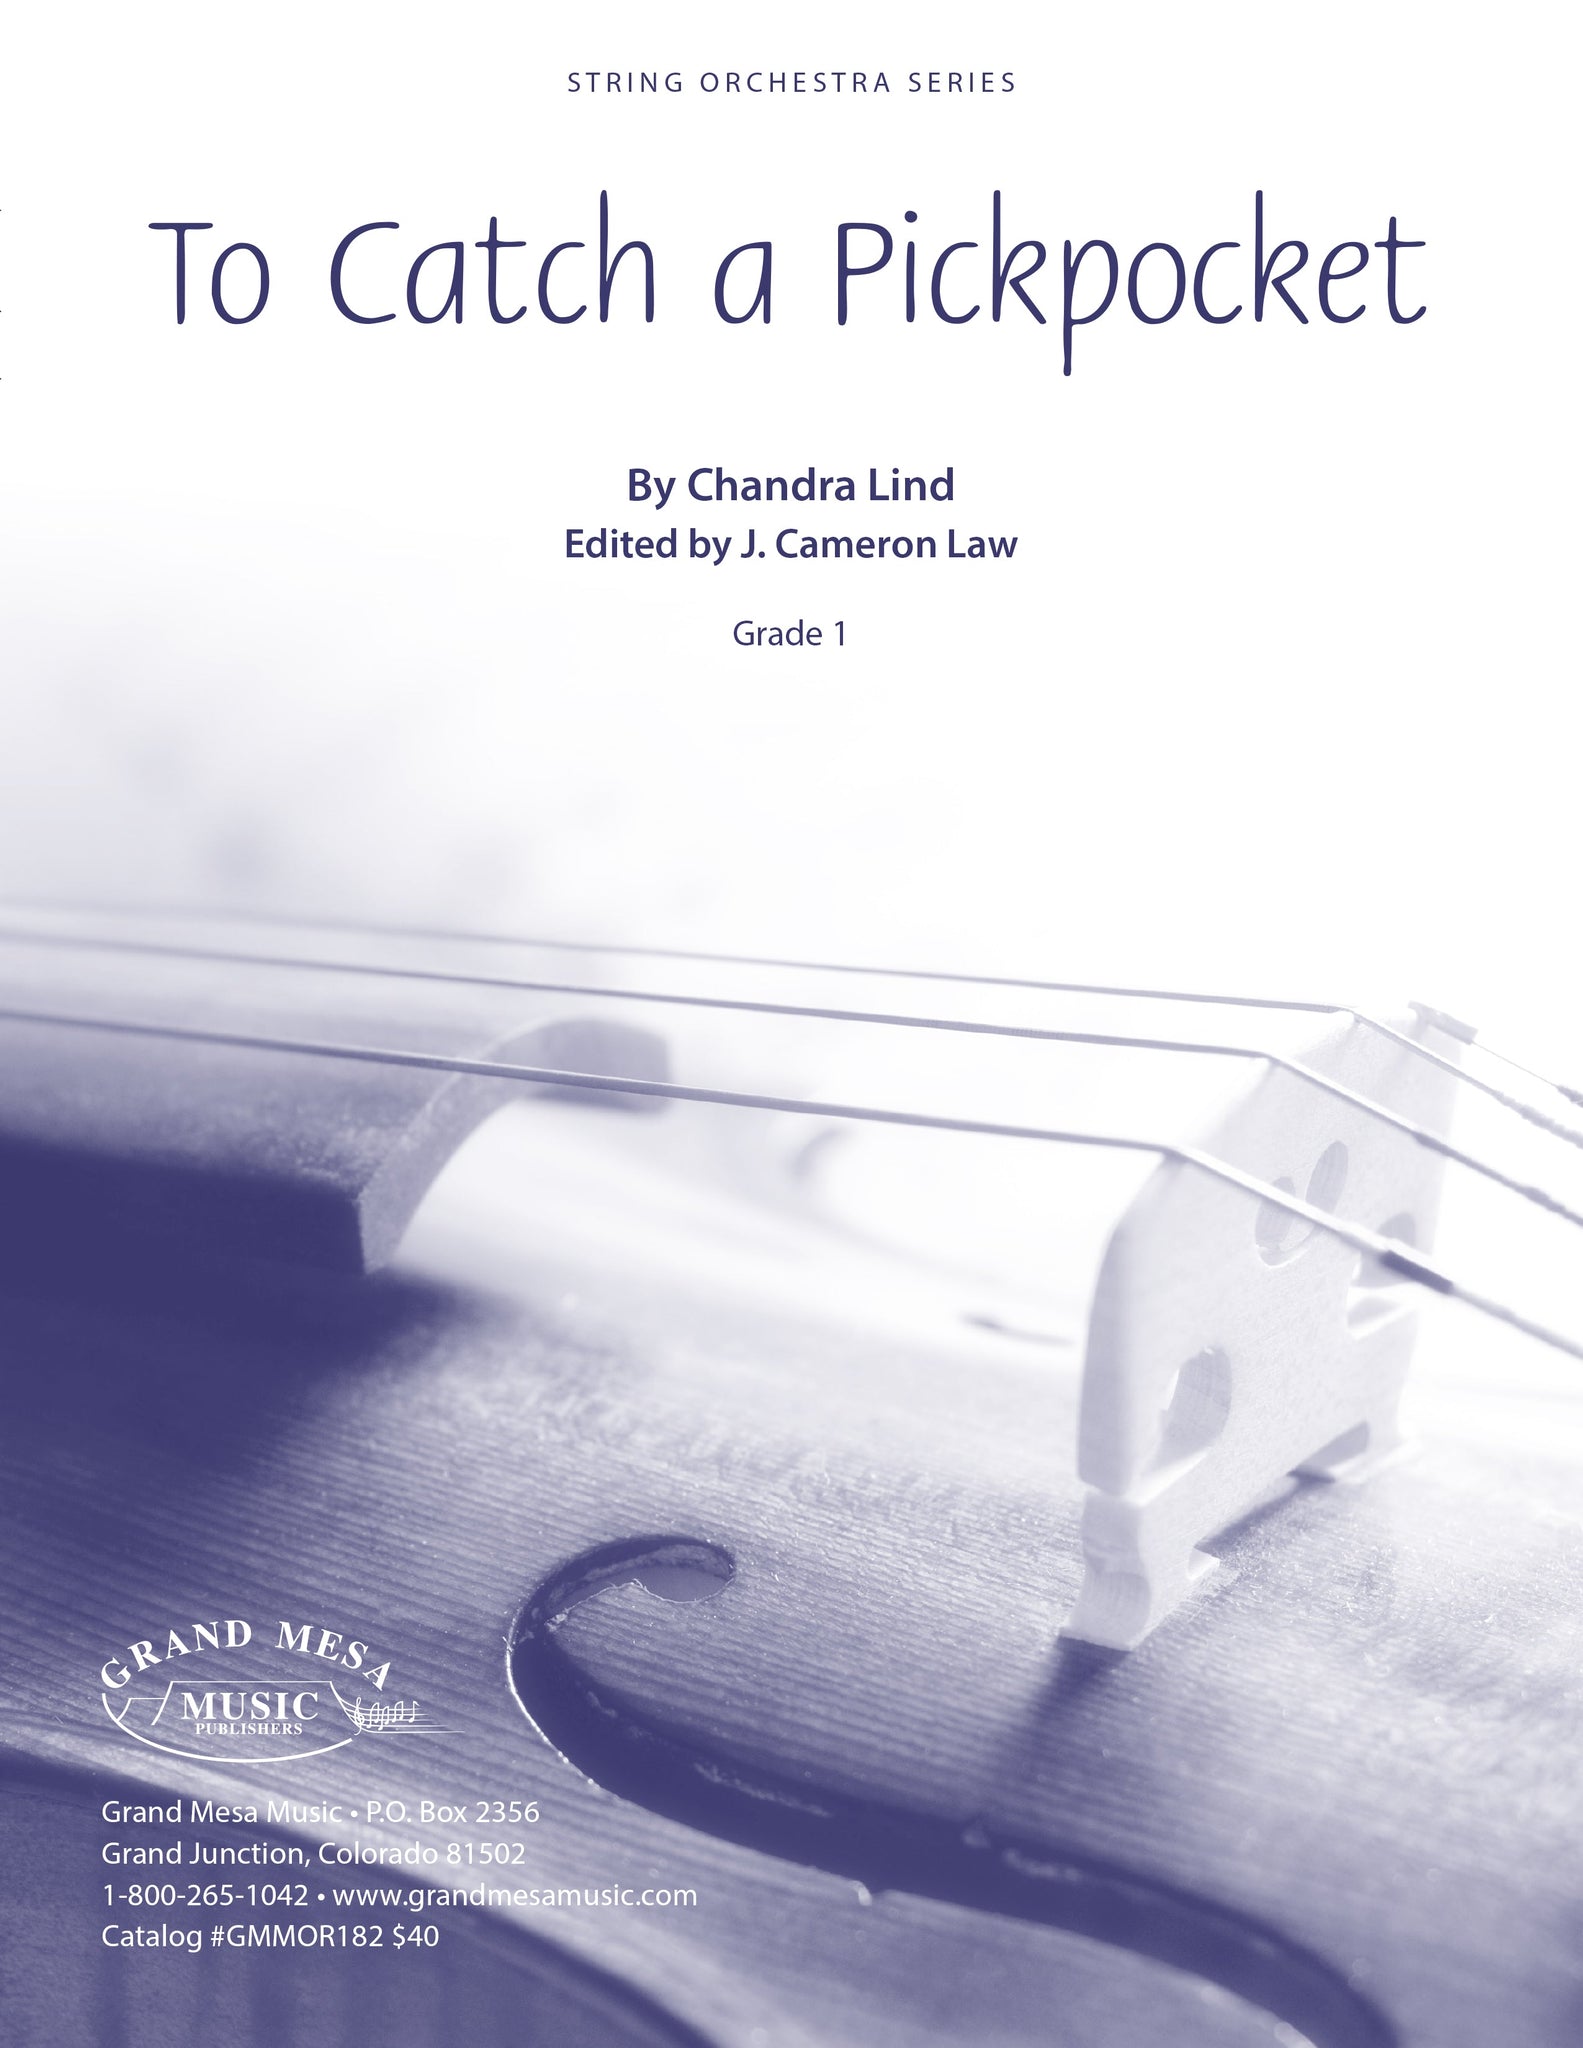 Strings sheet music cover of To Catch A Pickpocket, composed by Chandra Lind.